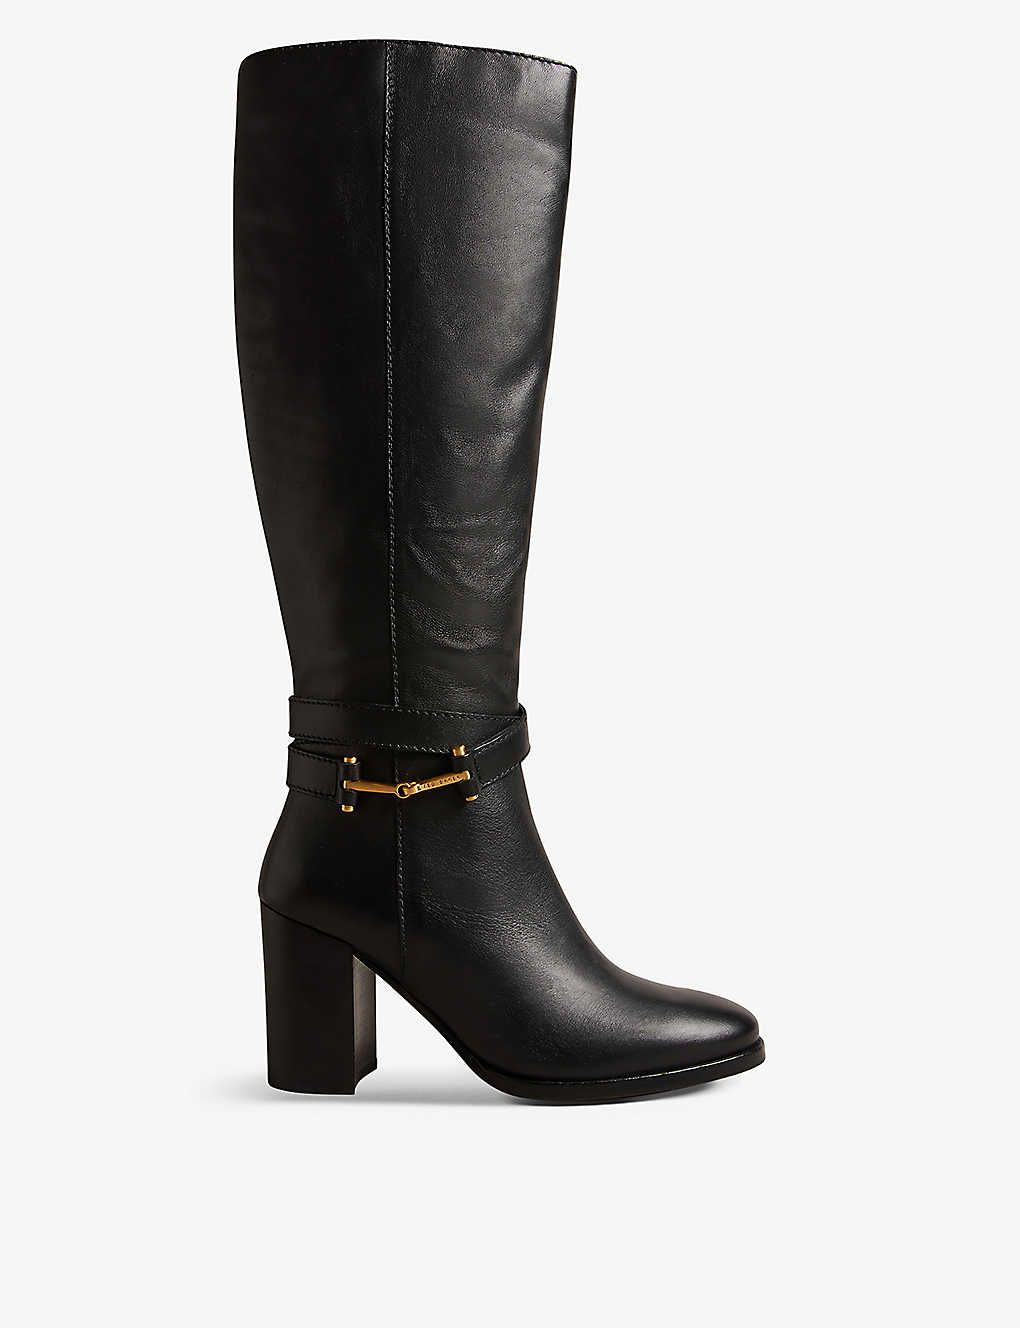 TED BAKER TED BAKER WOMENS BLACK ARYNA HARDWARE-EMBELLISHED LEATHER HEELED KNEE-HIGH BOOTS